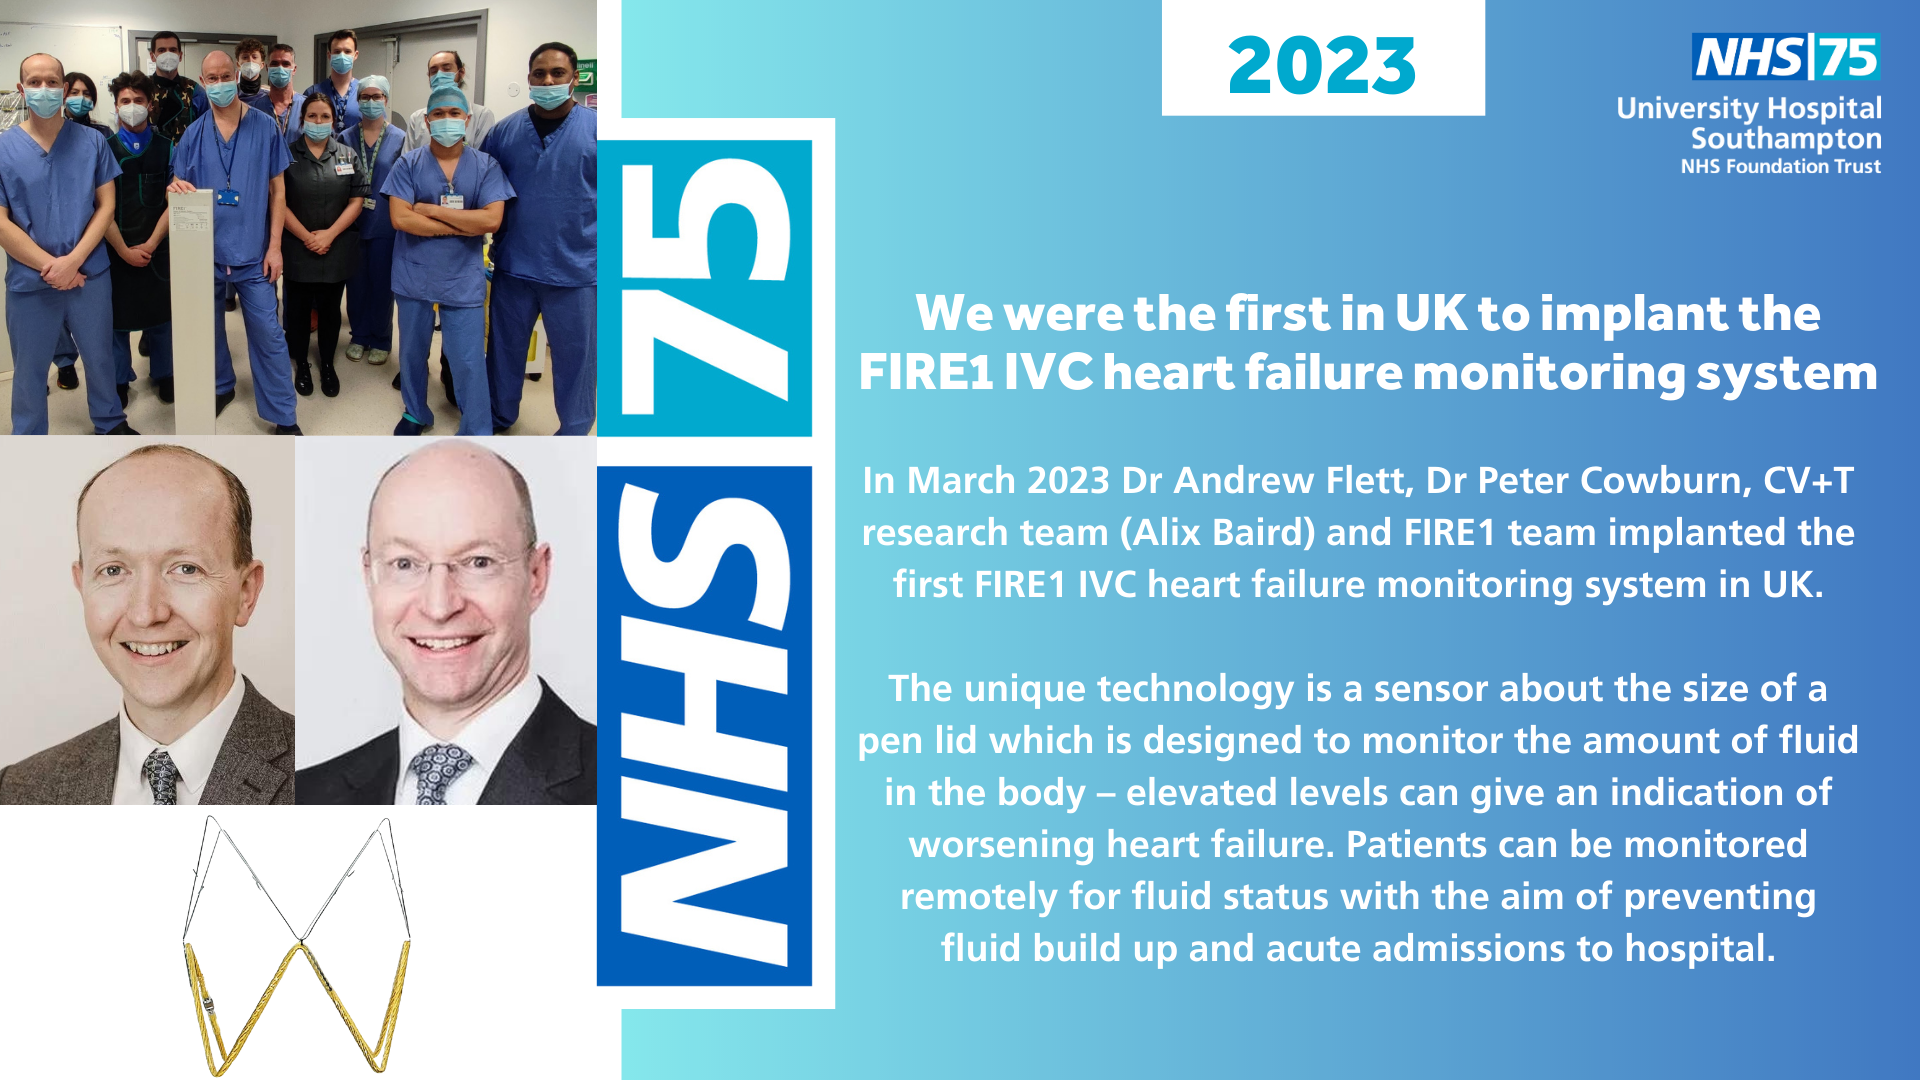 We were the first in UK to implant the FIRE1 IVC heart failure monitoring system